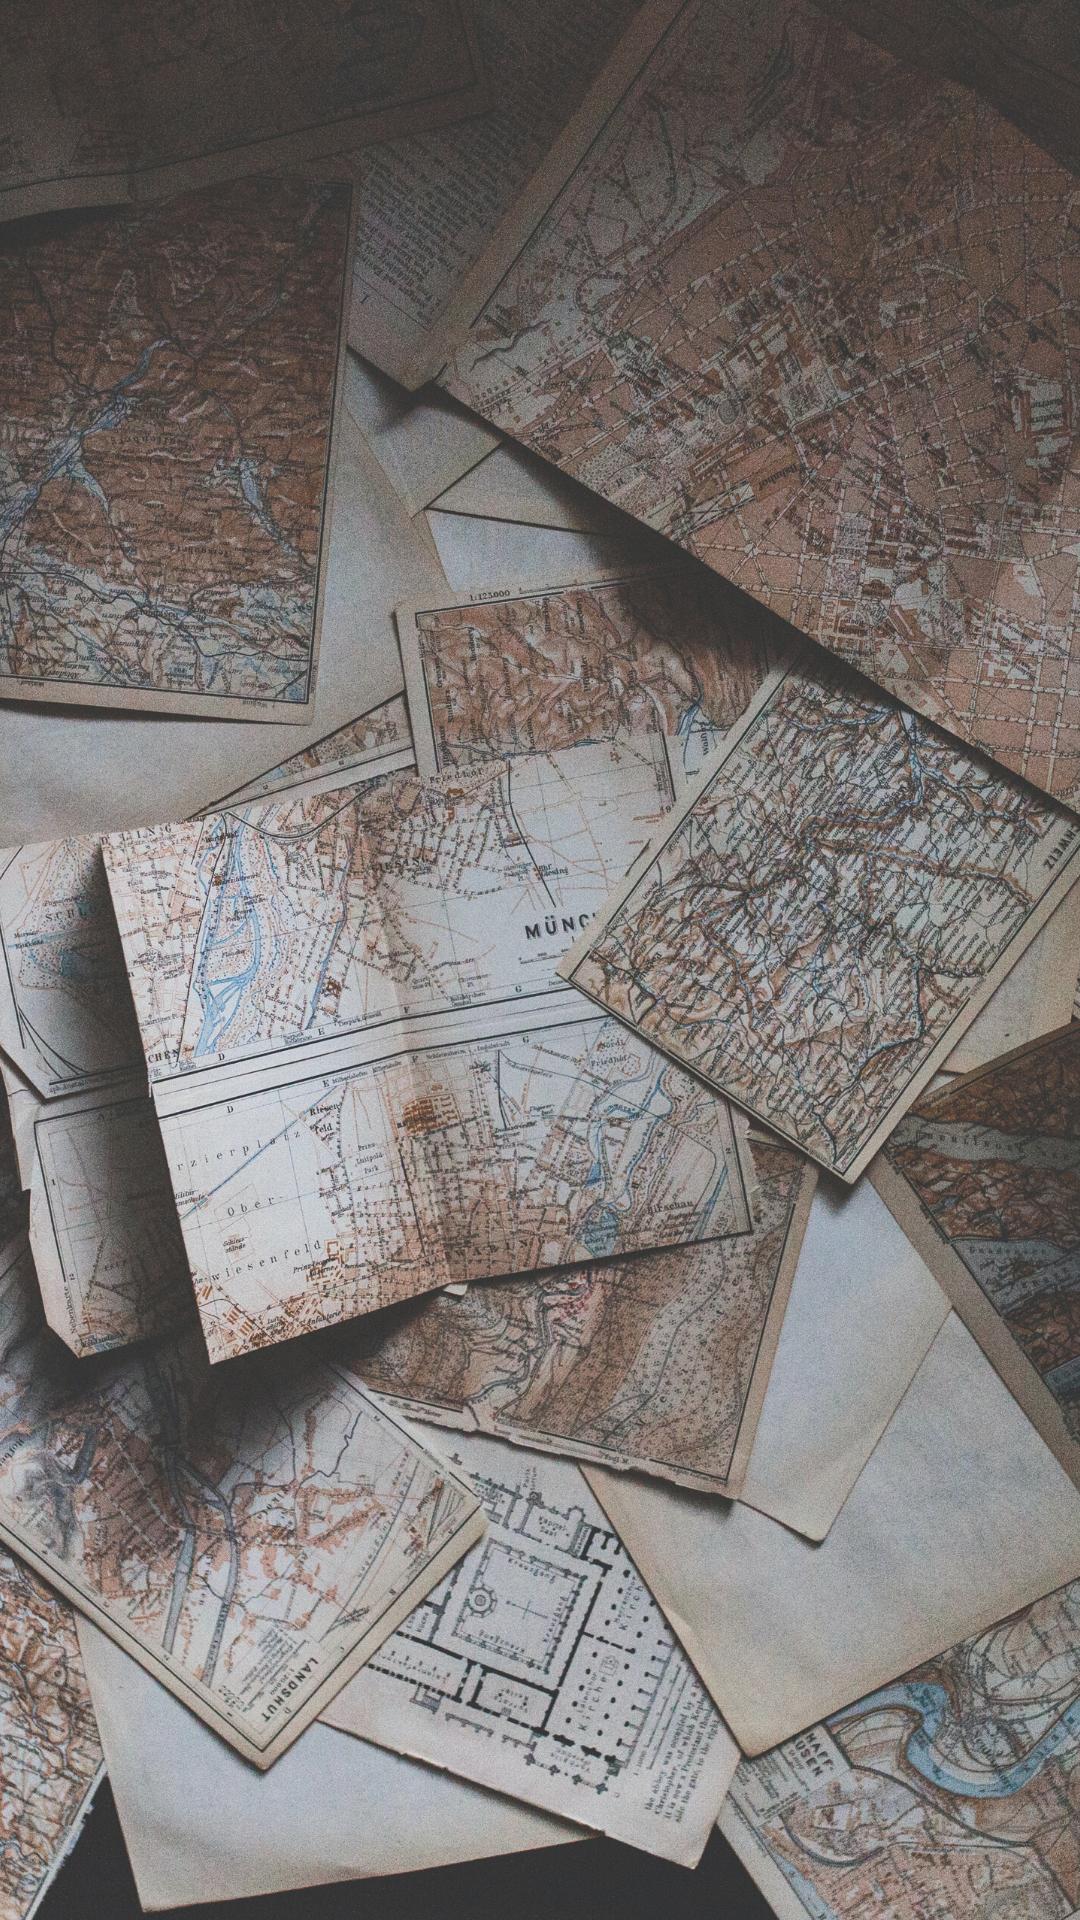 A pile of old maps on top - Dark academia, silver